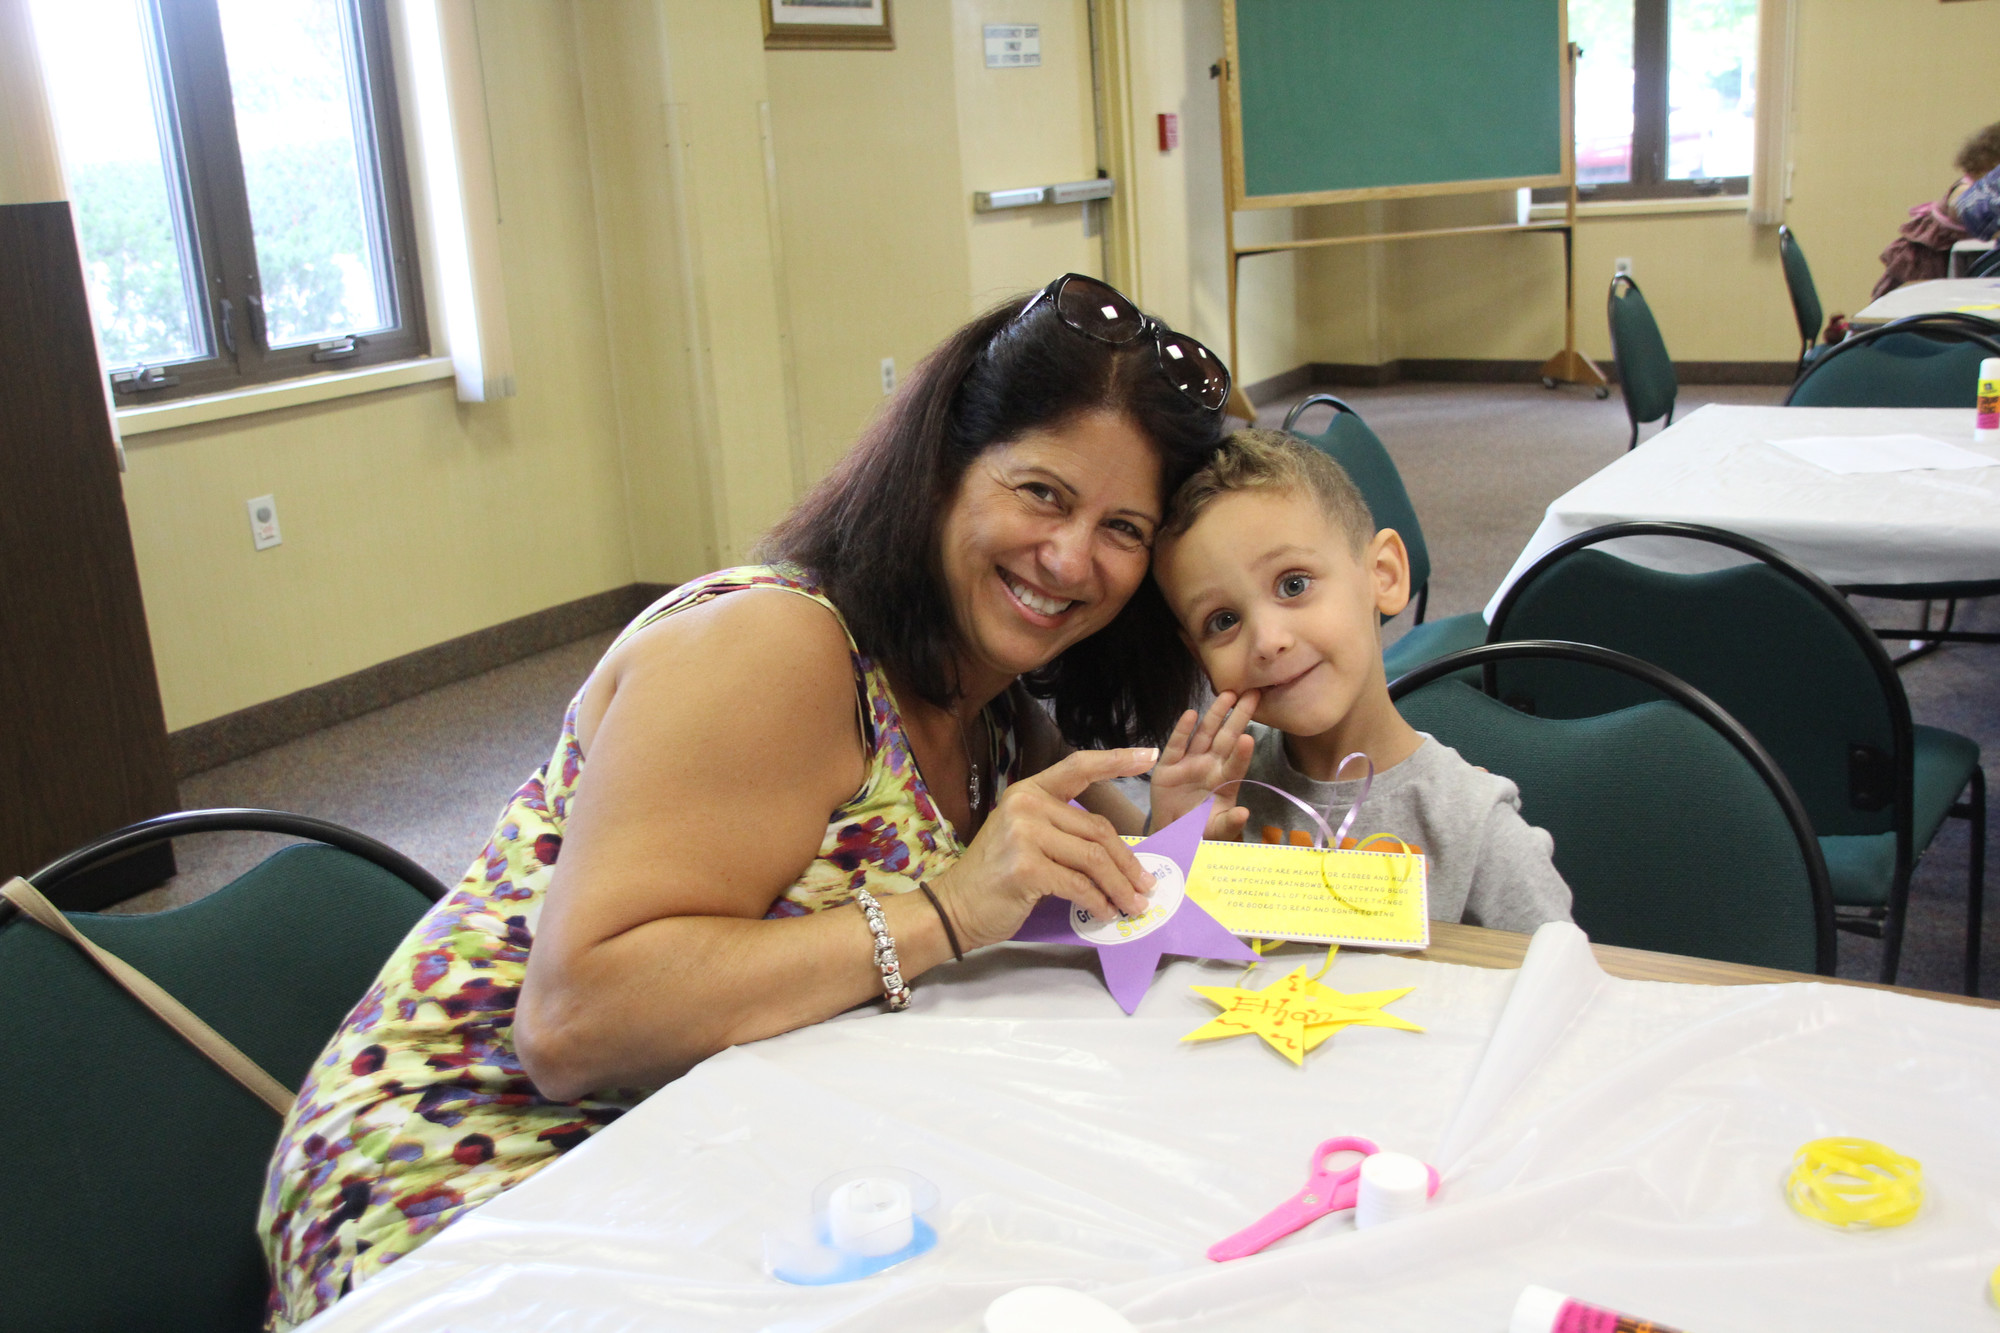 Lucy Gorsky helped her grandson, 3-year-old Ethan Lefkowitz, with crafts.